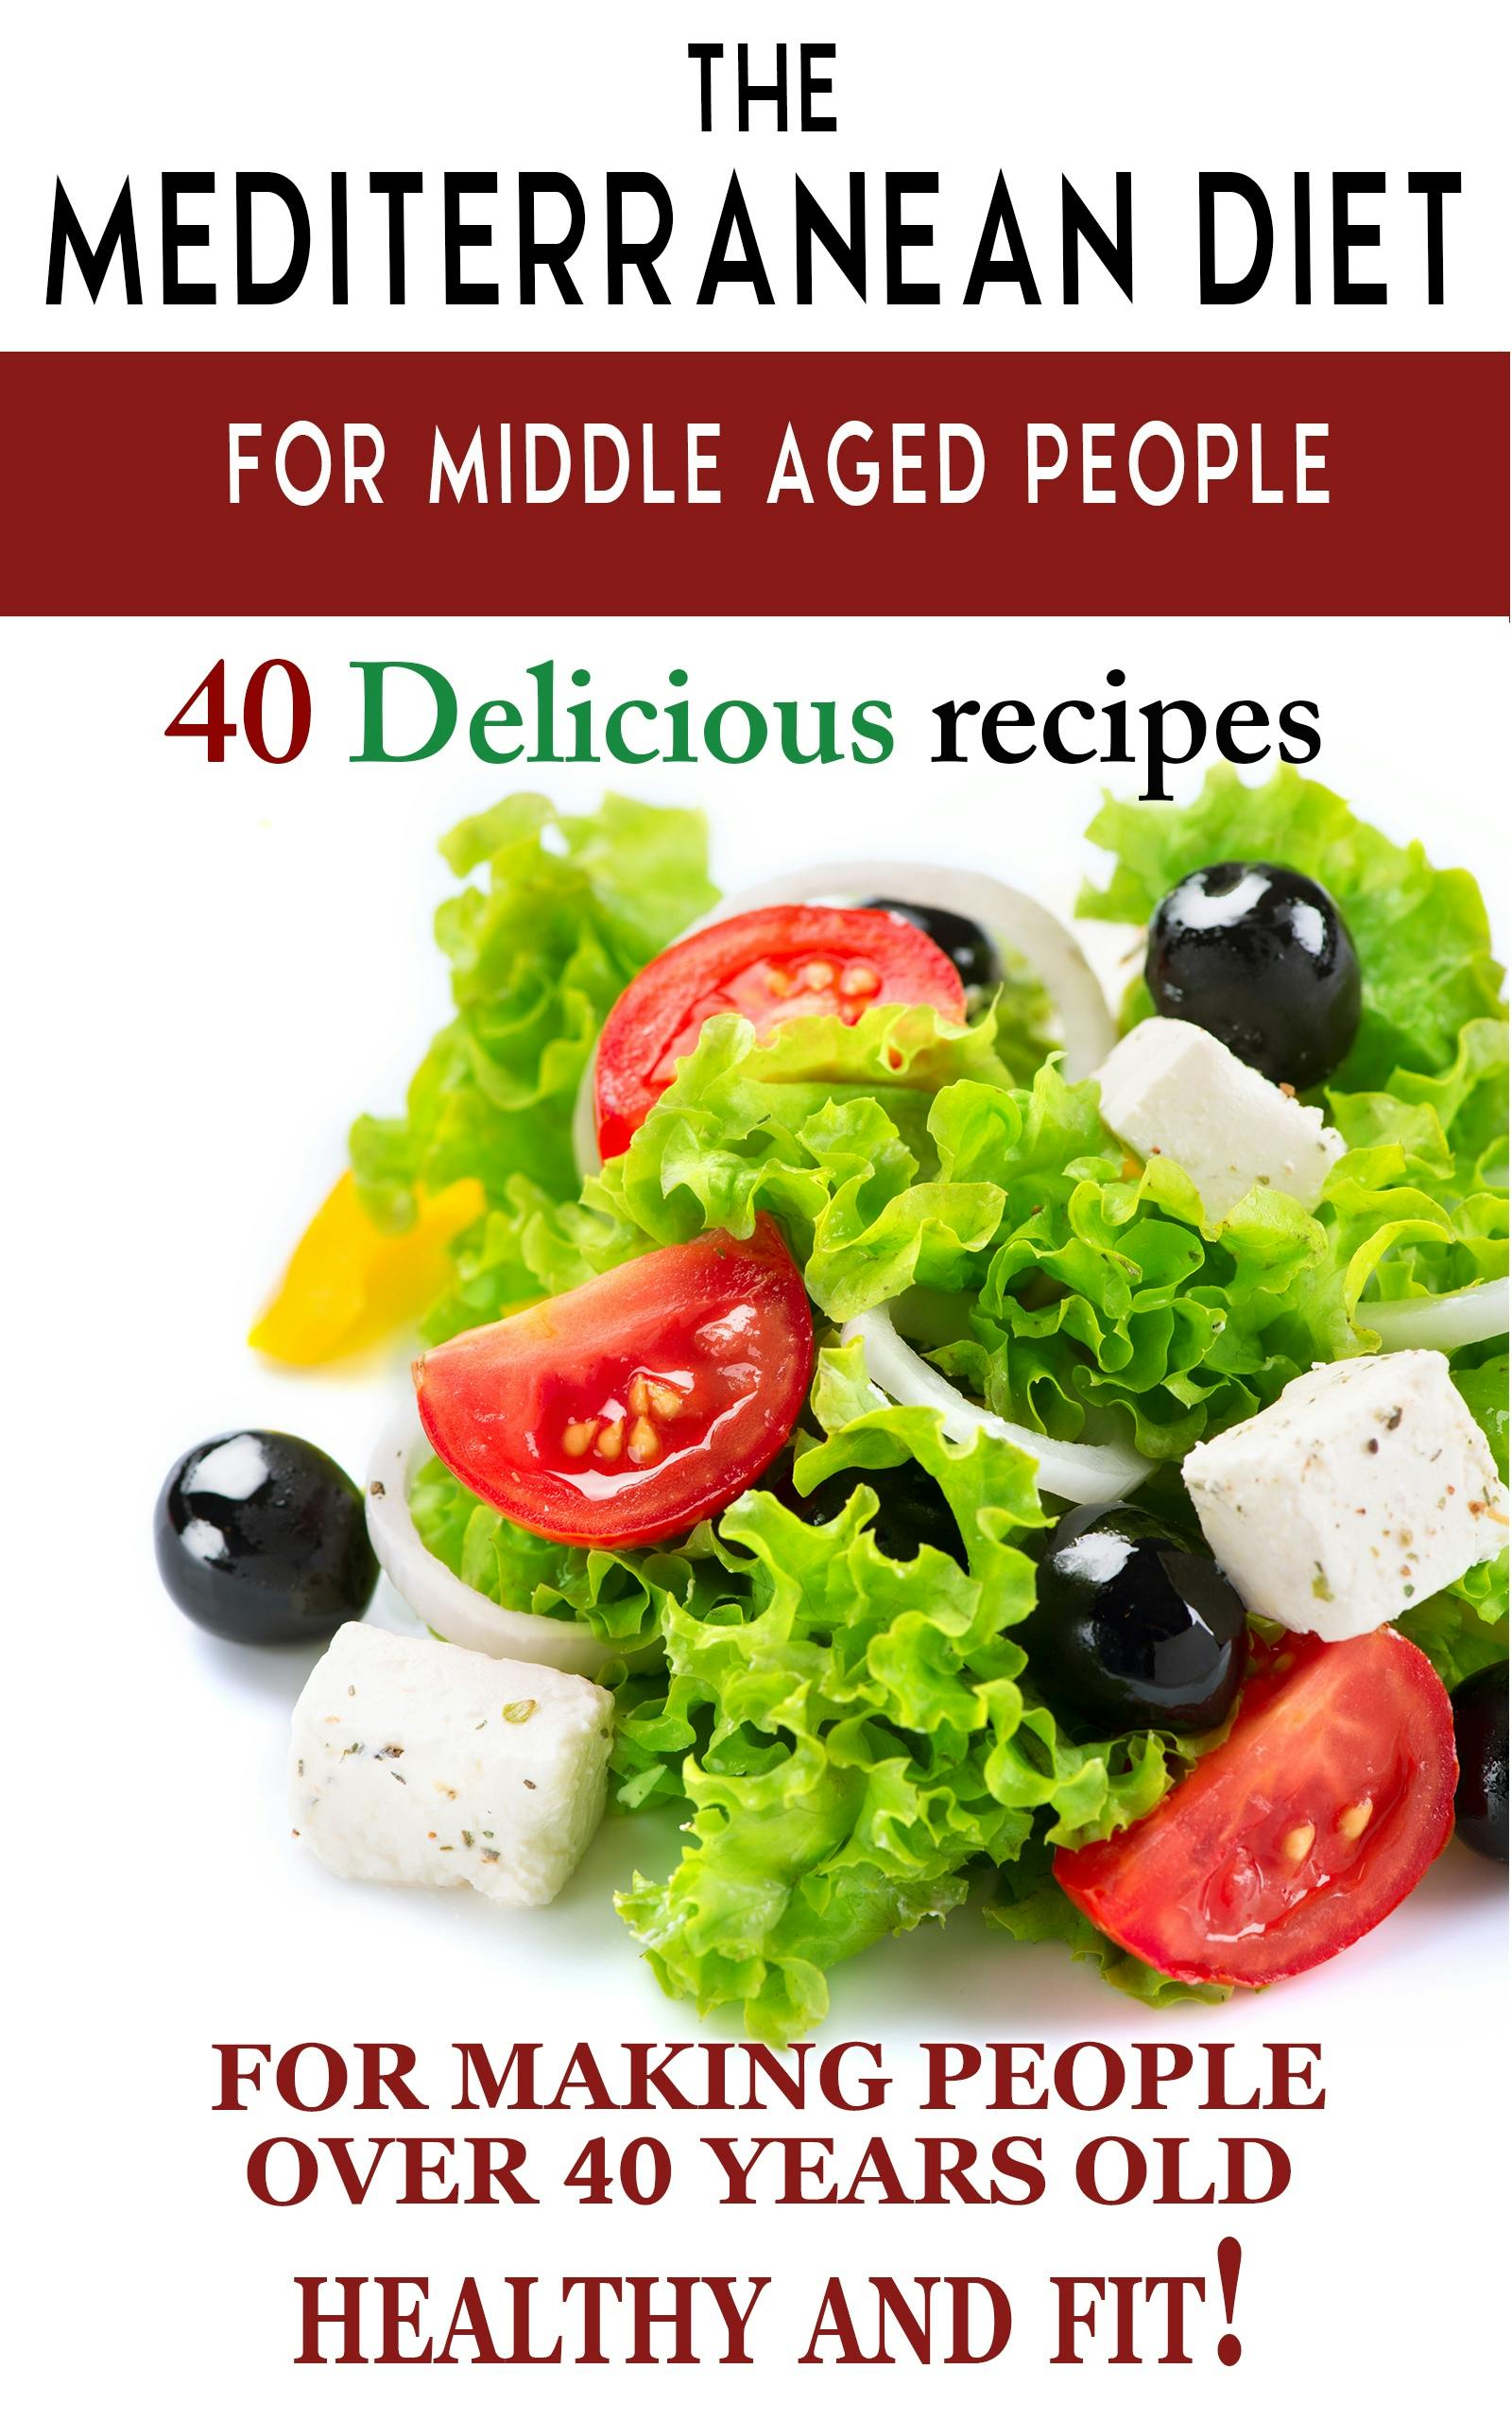 "Mediterranean diet for middle aged people: 40 delicious recipes to make people over 40 years old healthy and fit!" - Andrei Besedin